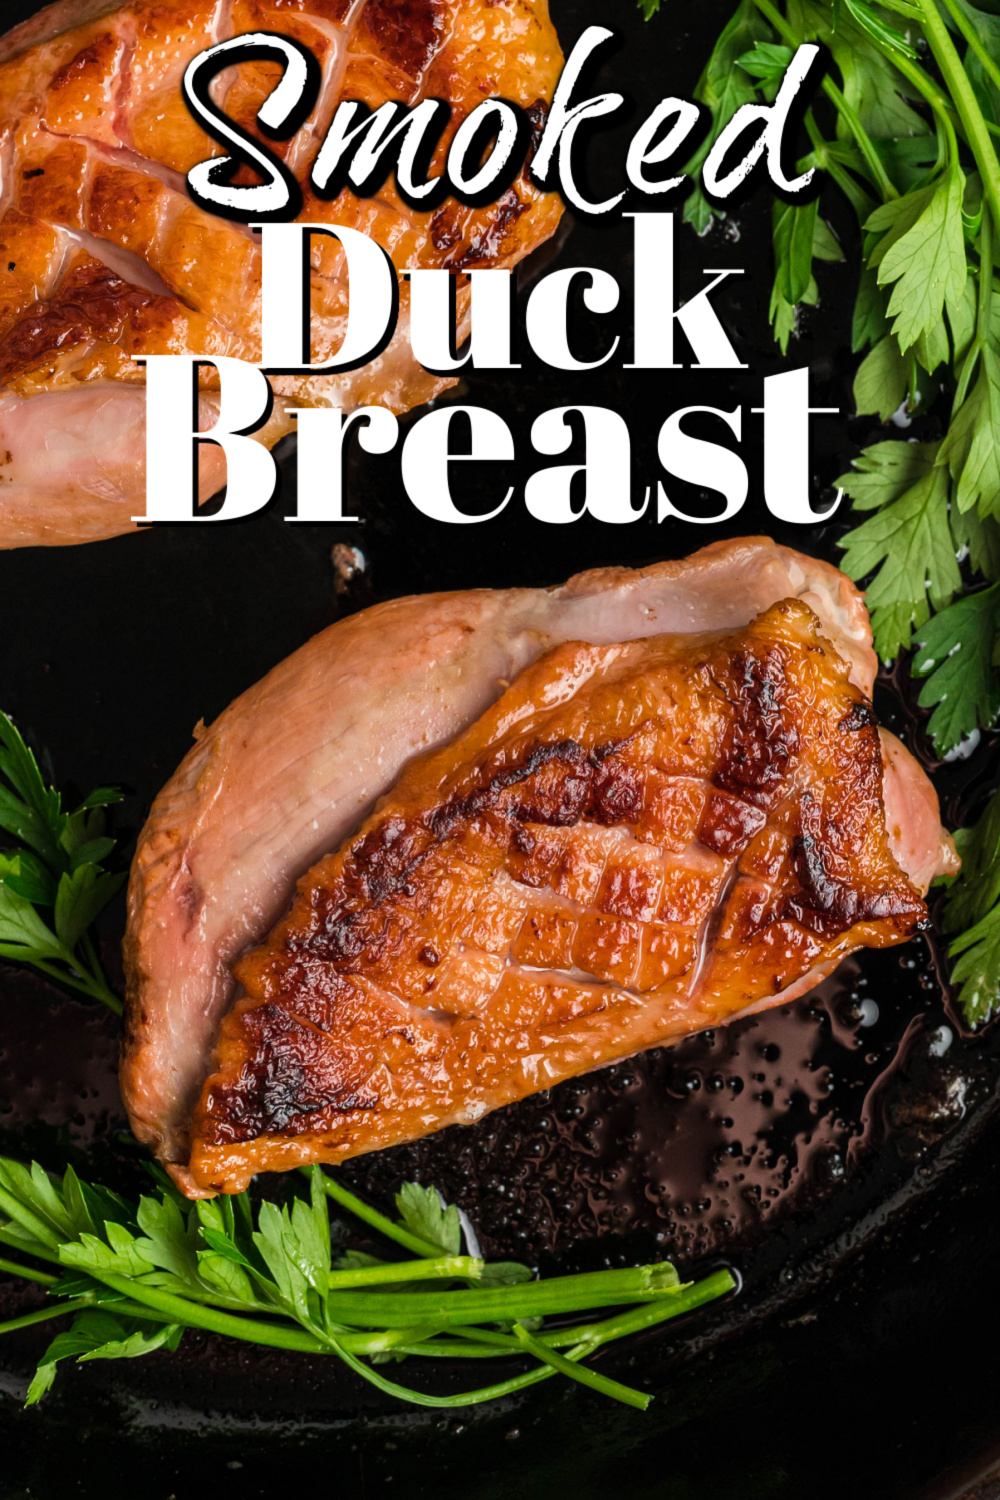 This smoked duck breast recipe will impress your family and friends; best of all, it is easy to prepare and tastes fantastic!